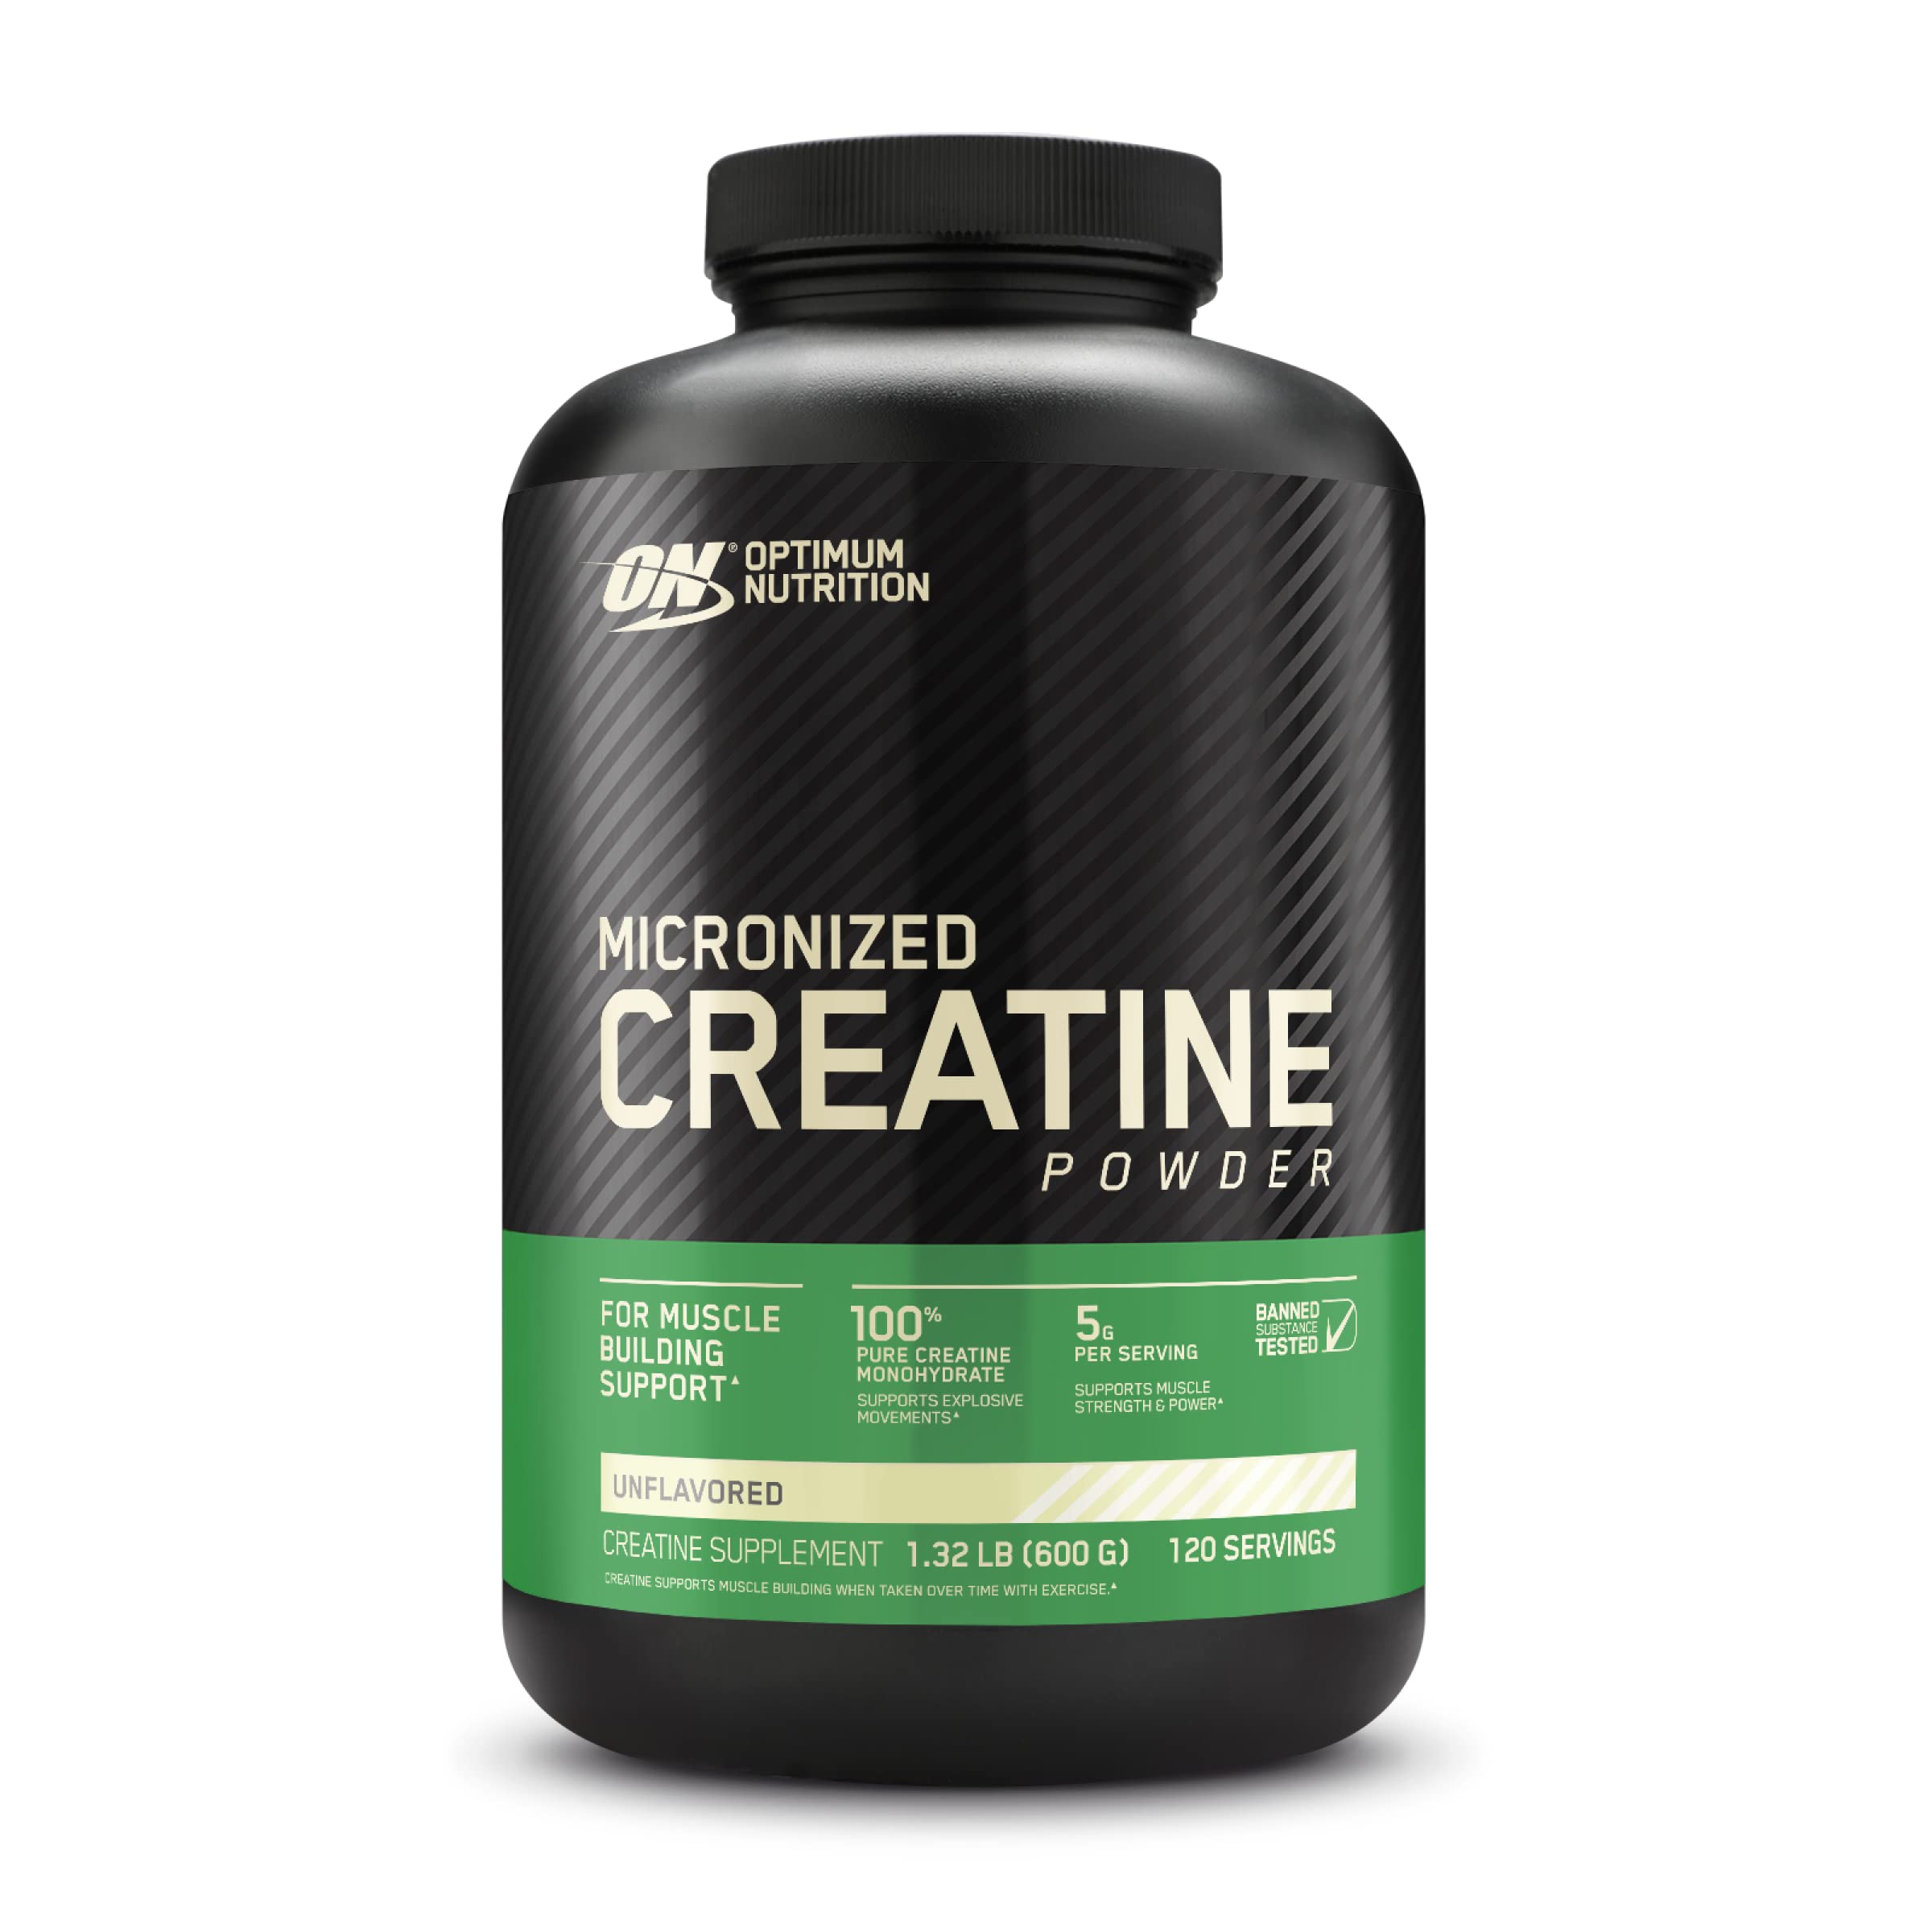 Optimum Nutrition Gold Standard Pre Workout with Creatine, Beta-Alanine & Micronized Creatine Monohydrate Powder, Unflavored, Keto Friendly, 120 Servings (Packaging May Vary)